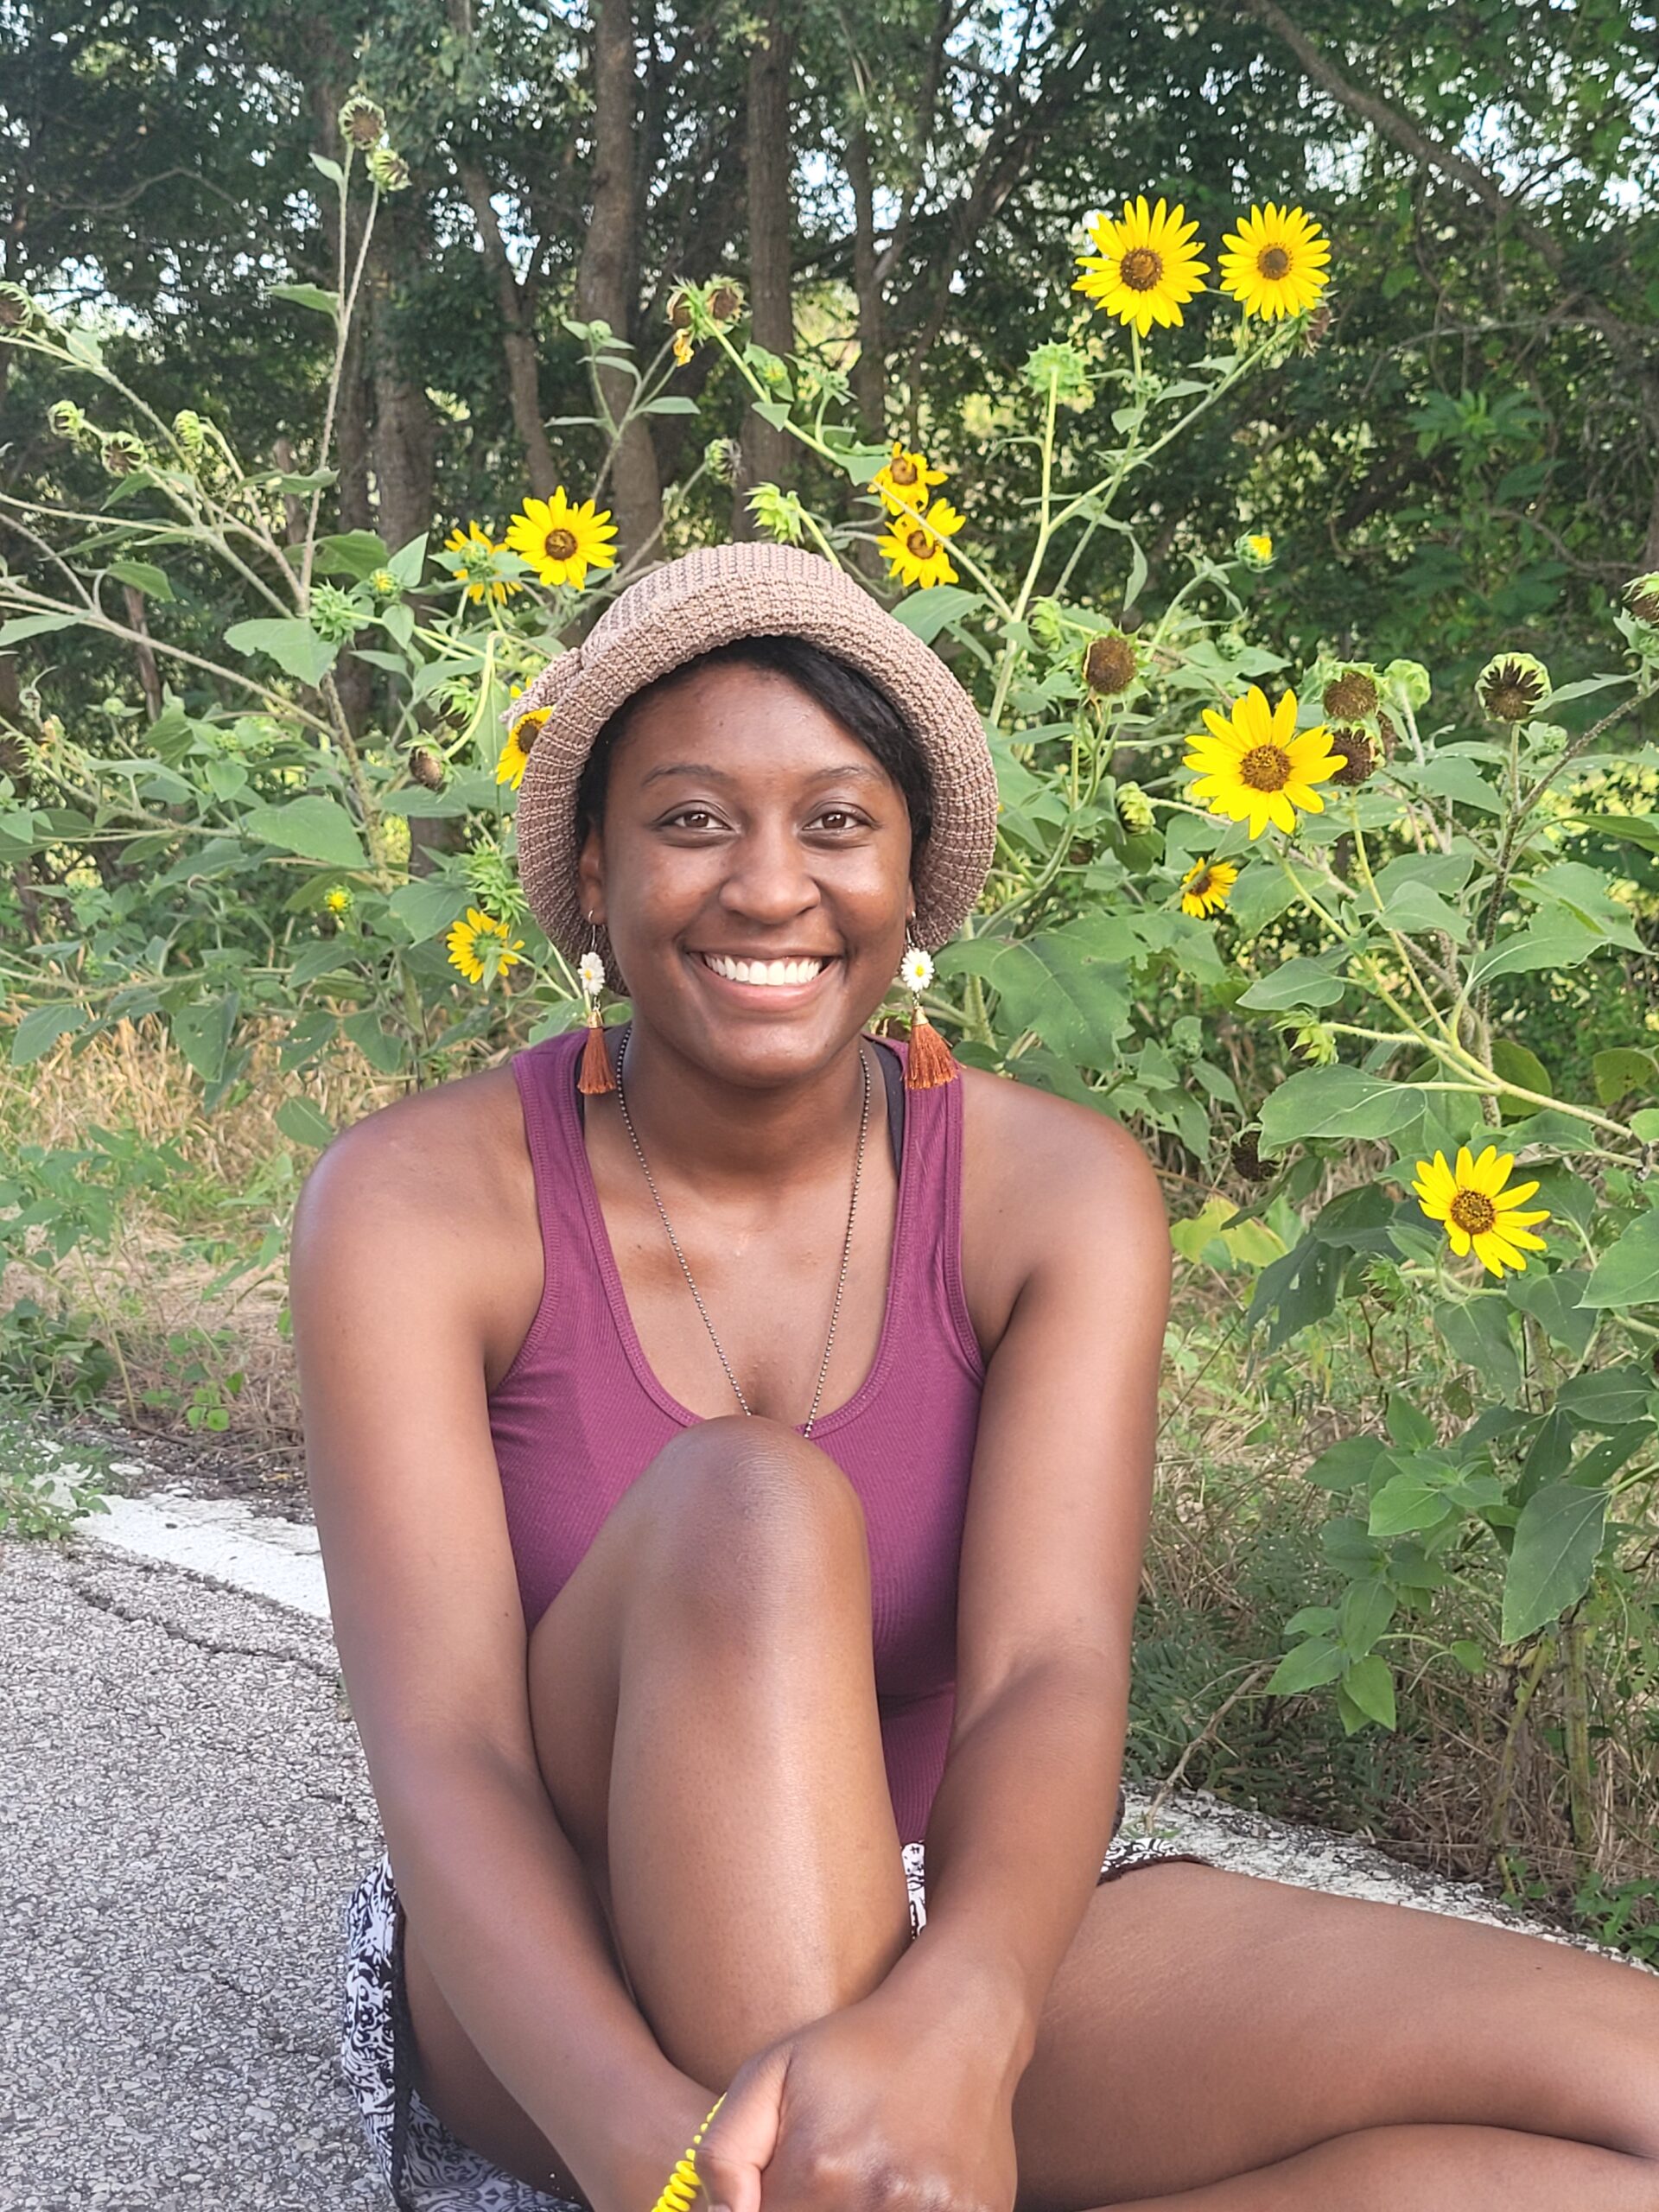 Trip Leader Tuesday: Liya Scott expects the unexpected